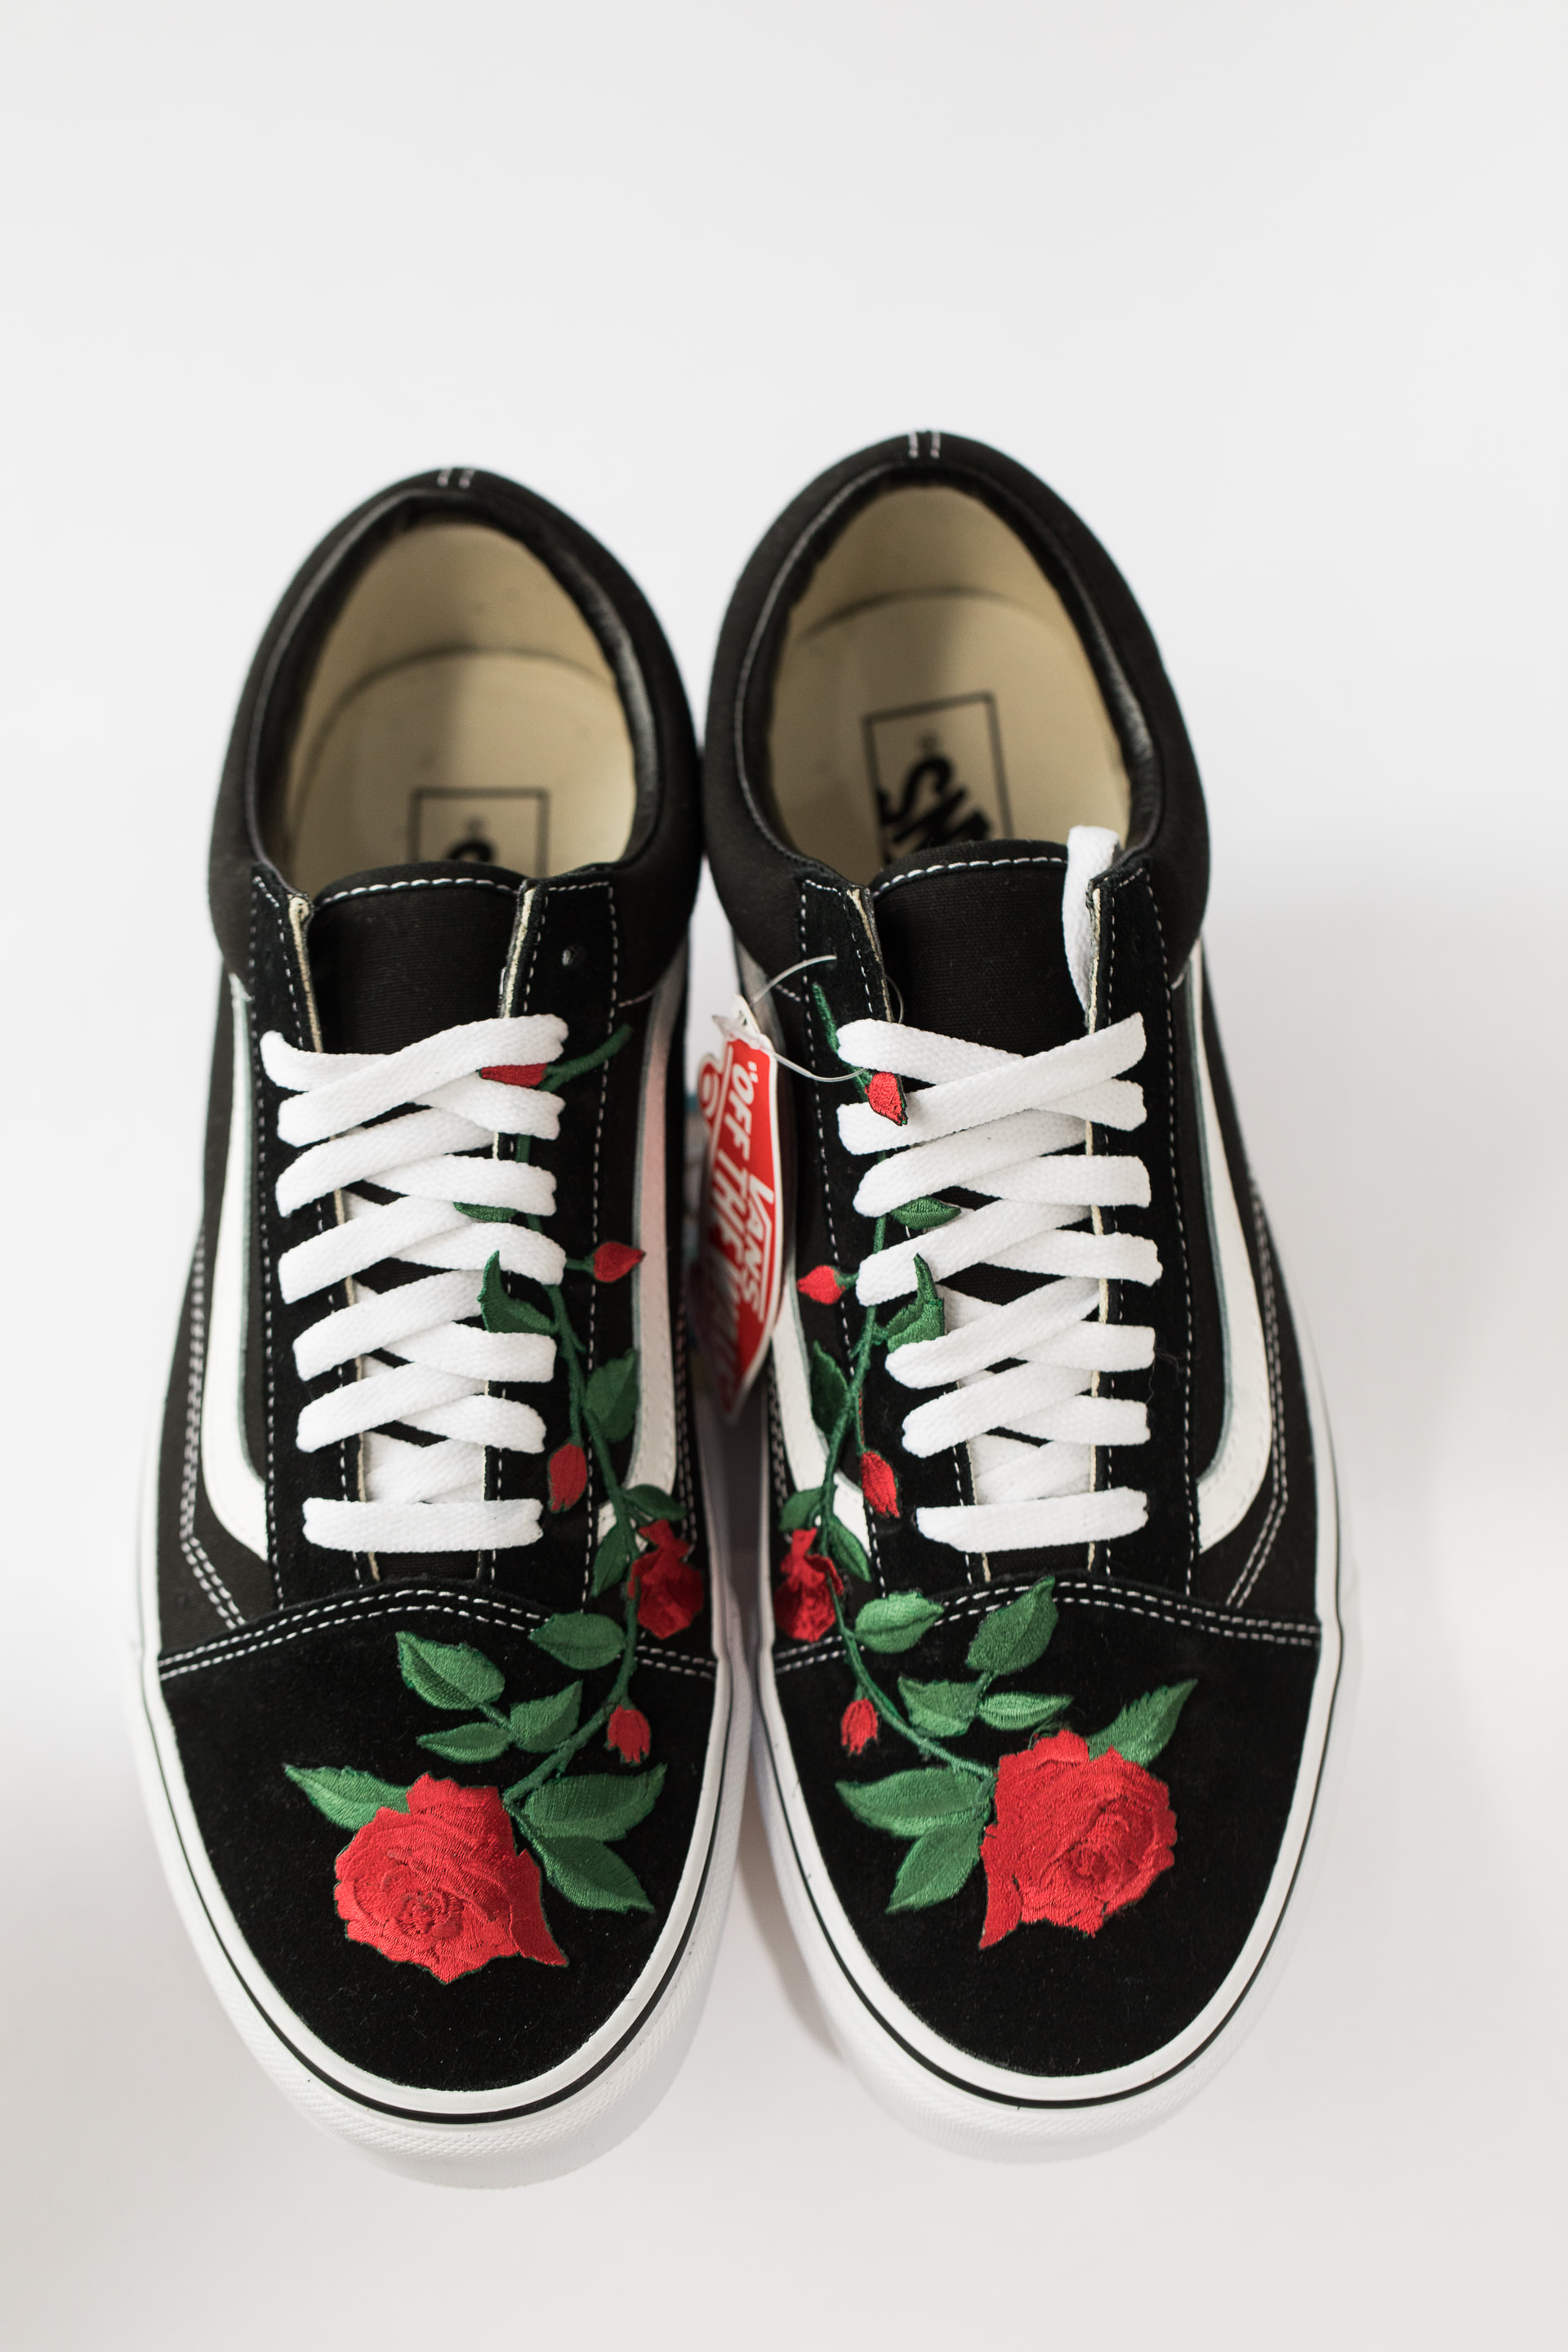 Registrering grill zone VANS SK8-low Original Mens Shoes embroidered roses edition